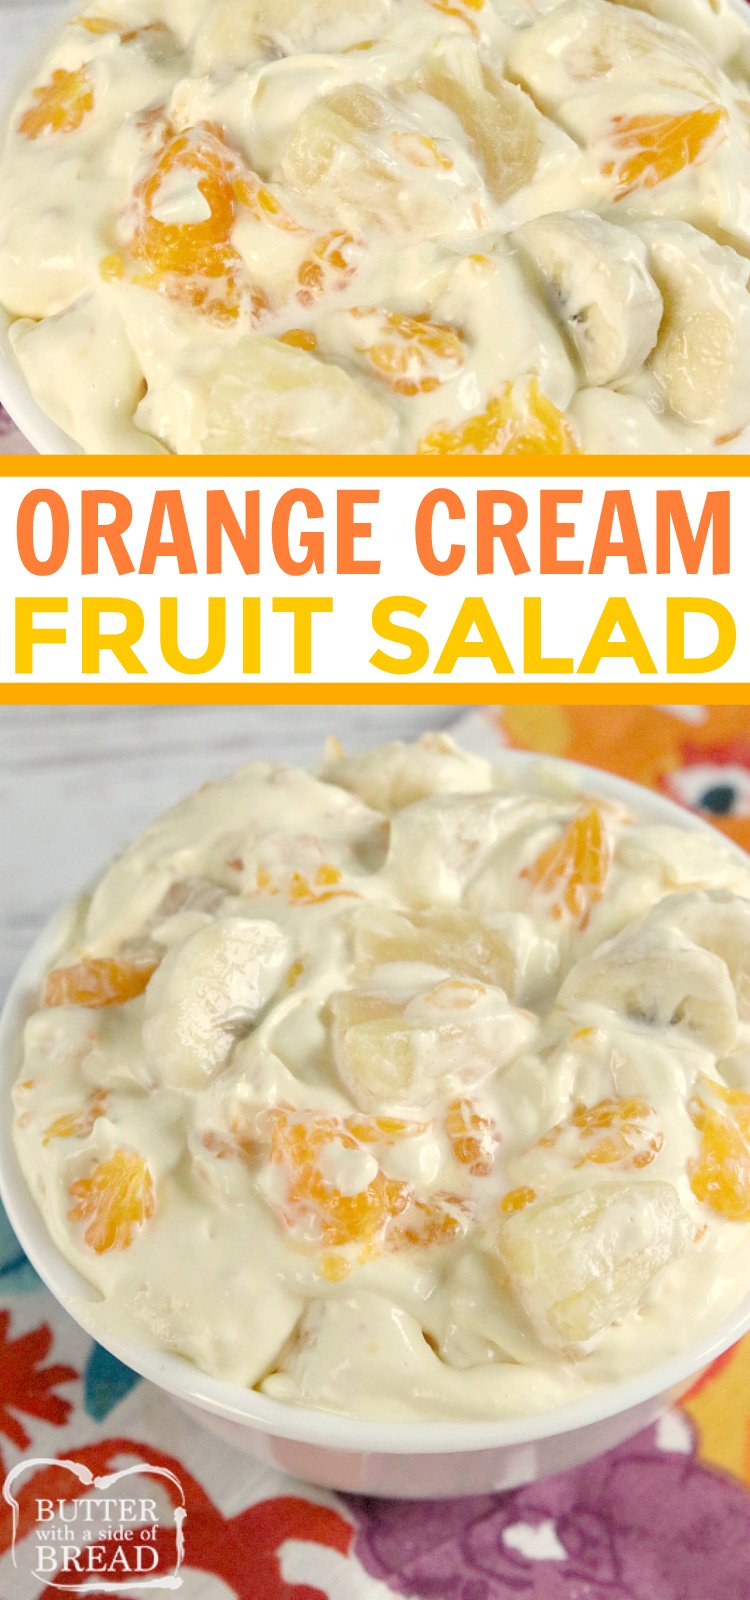 Orange Cream Fruit Salad is a delicious fruit salad filled with oranges, pineapple and bananas with a sweet orange cream mixed in! Perfect to go alongside Easter dinner!